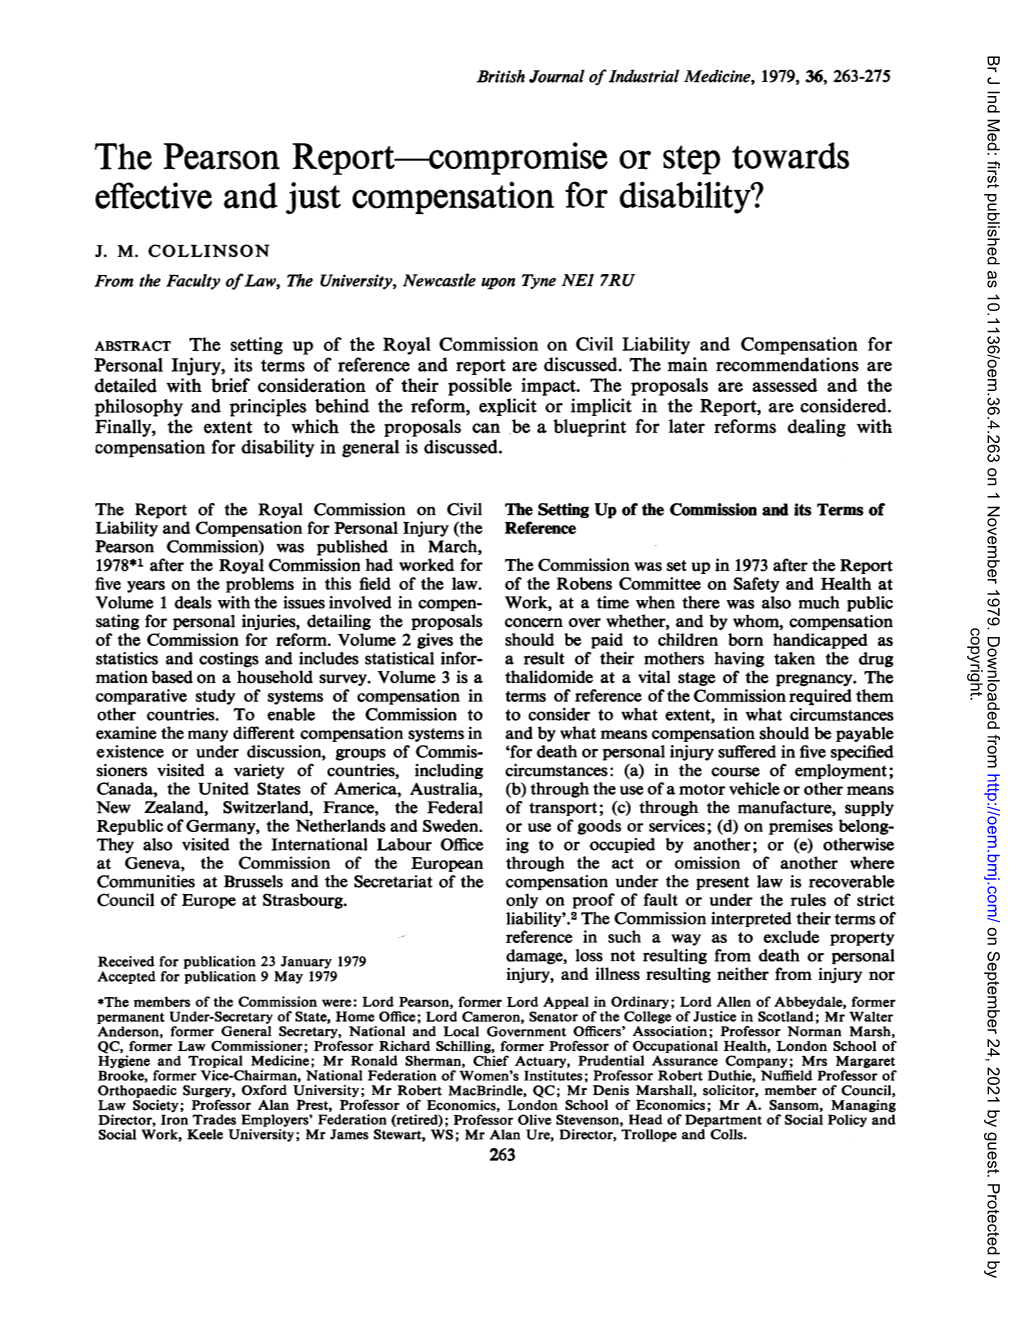 The Pearson Report-Compromise Or Step Towards Effective and Just Compensation for Disability?